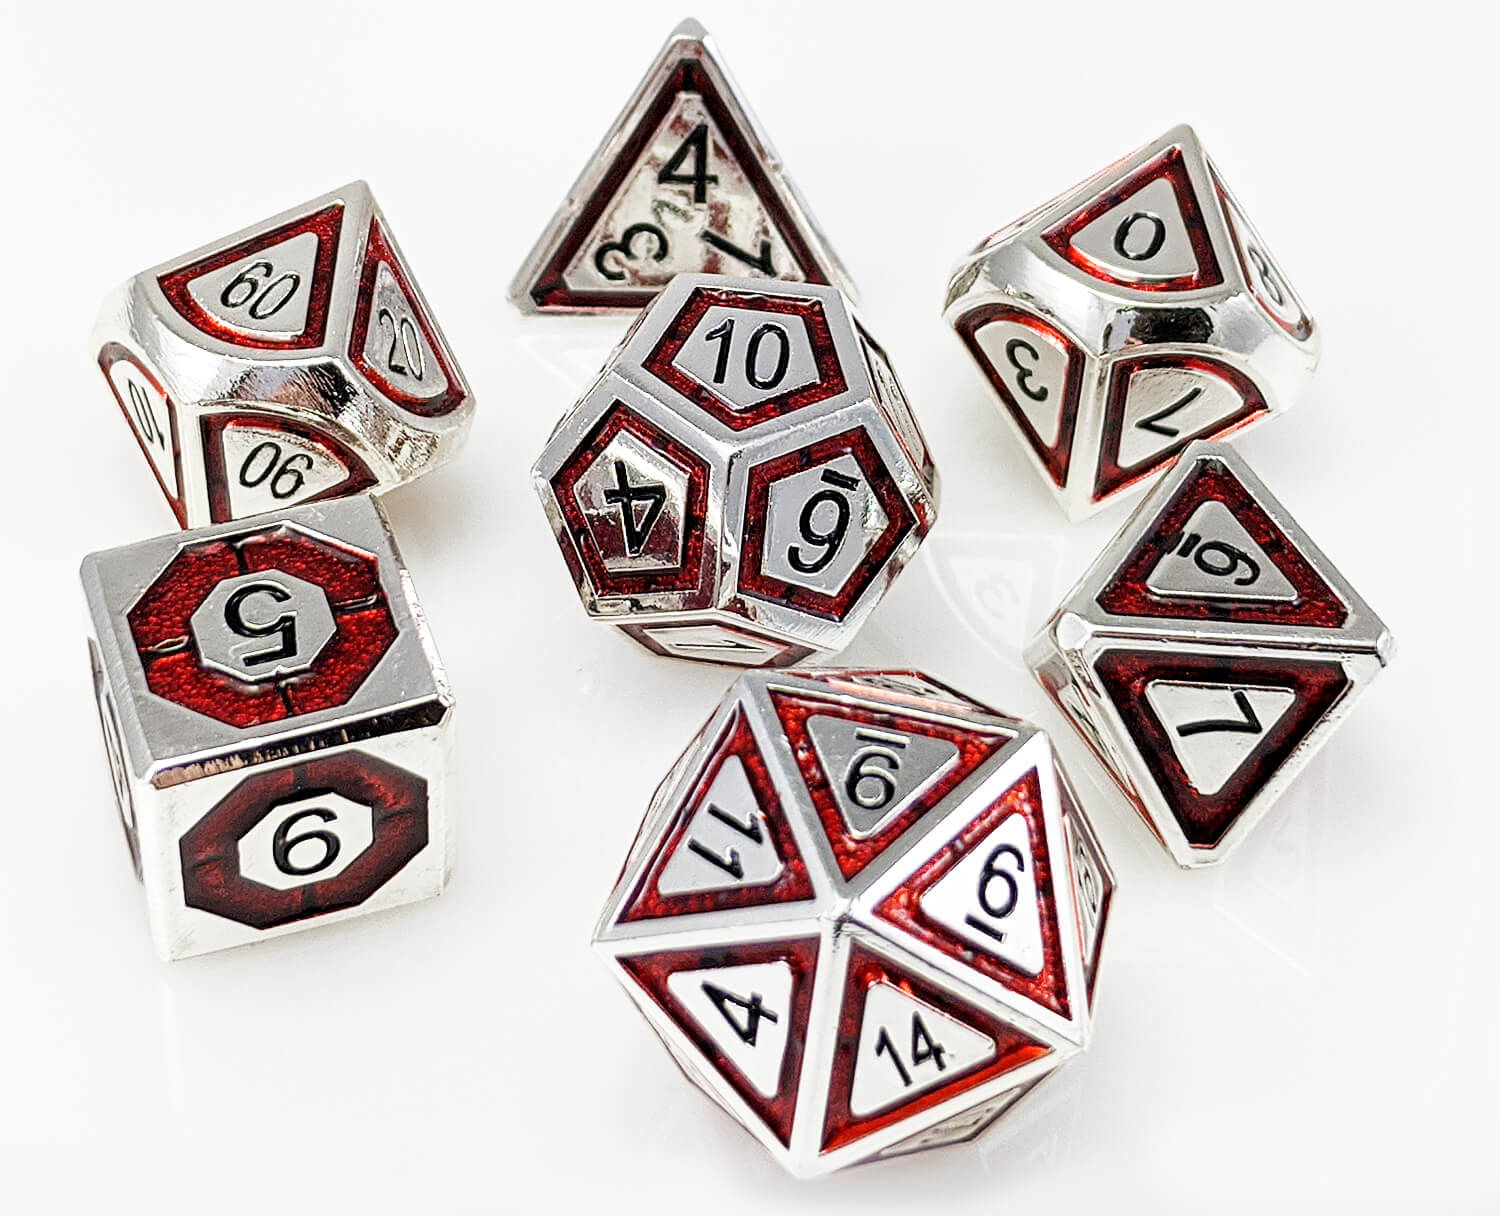 Dice (Bright And Blood Red) | Metal RPG Role G Dark Elf Dice